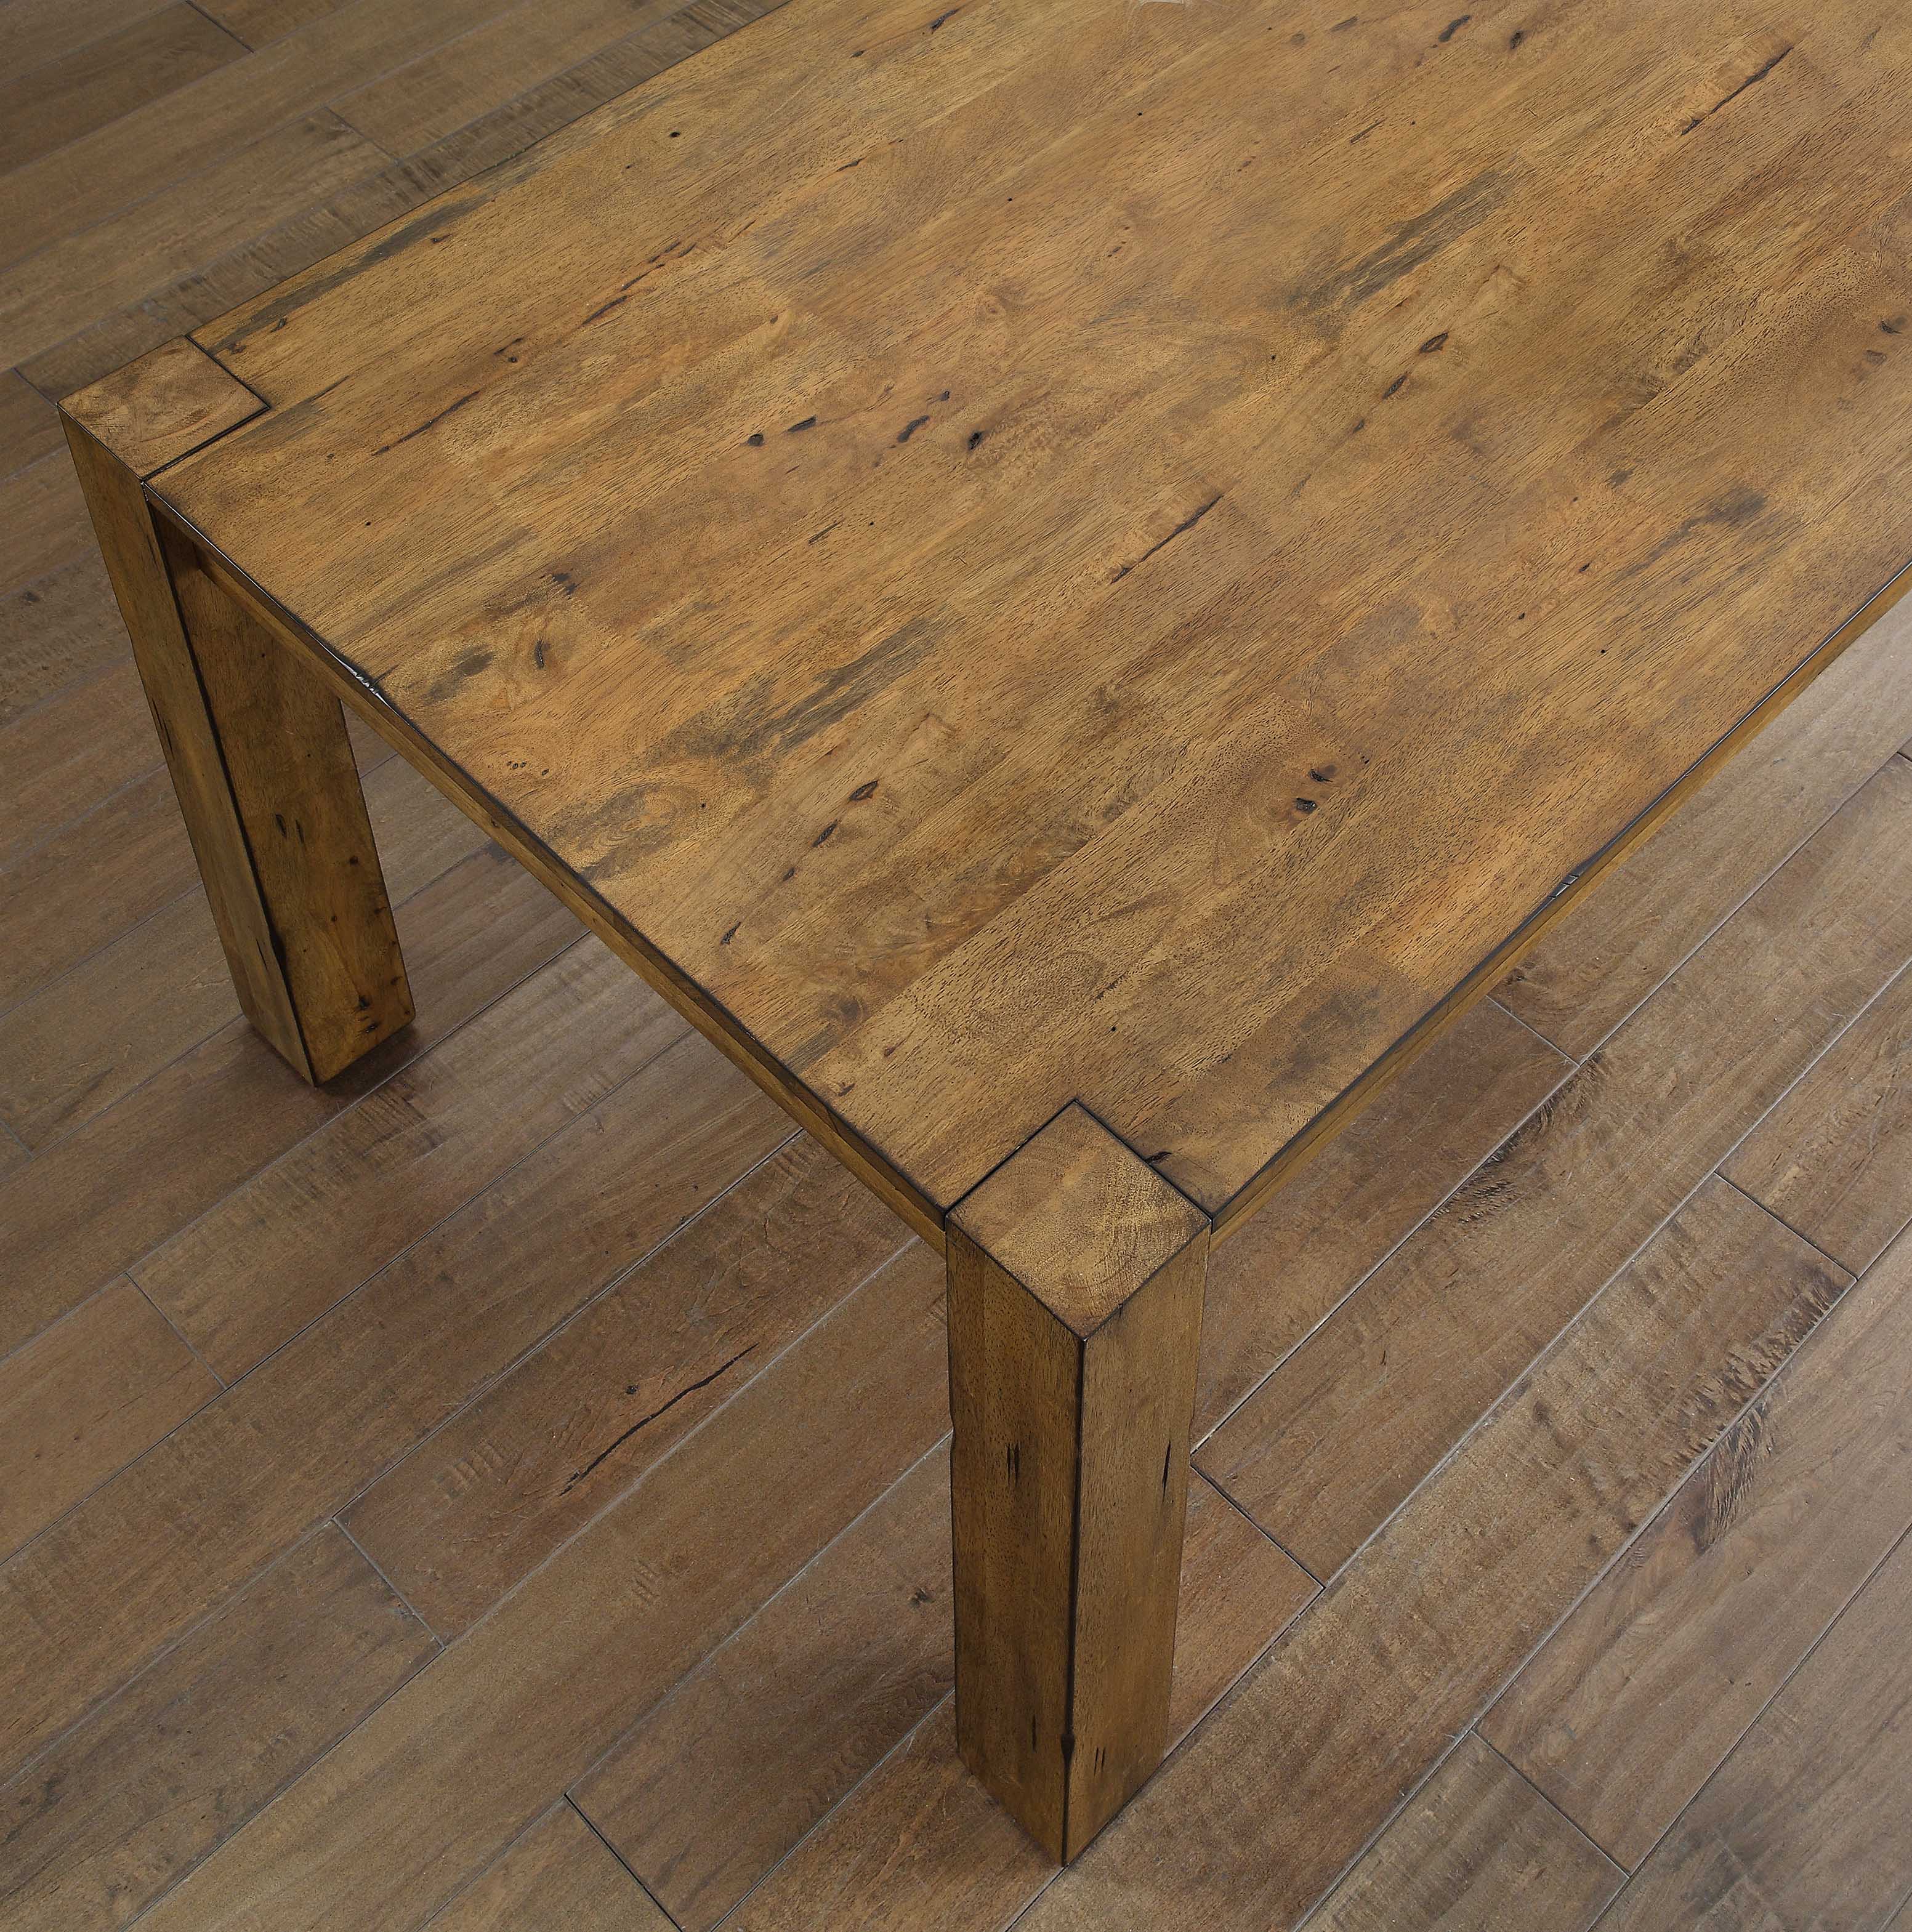 Better Homes & Gardens Bryant Solid Wood Dining Table, Rustic Brown - image 8 of 14